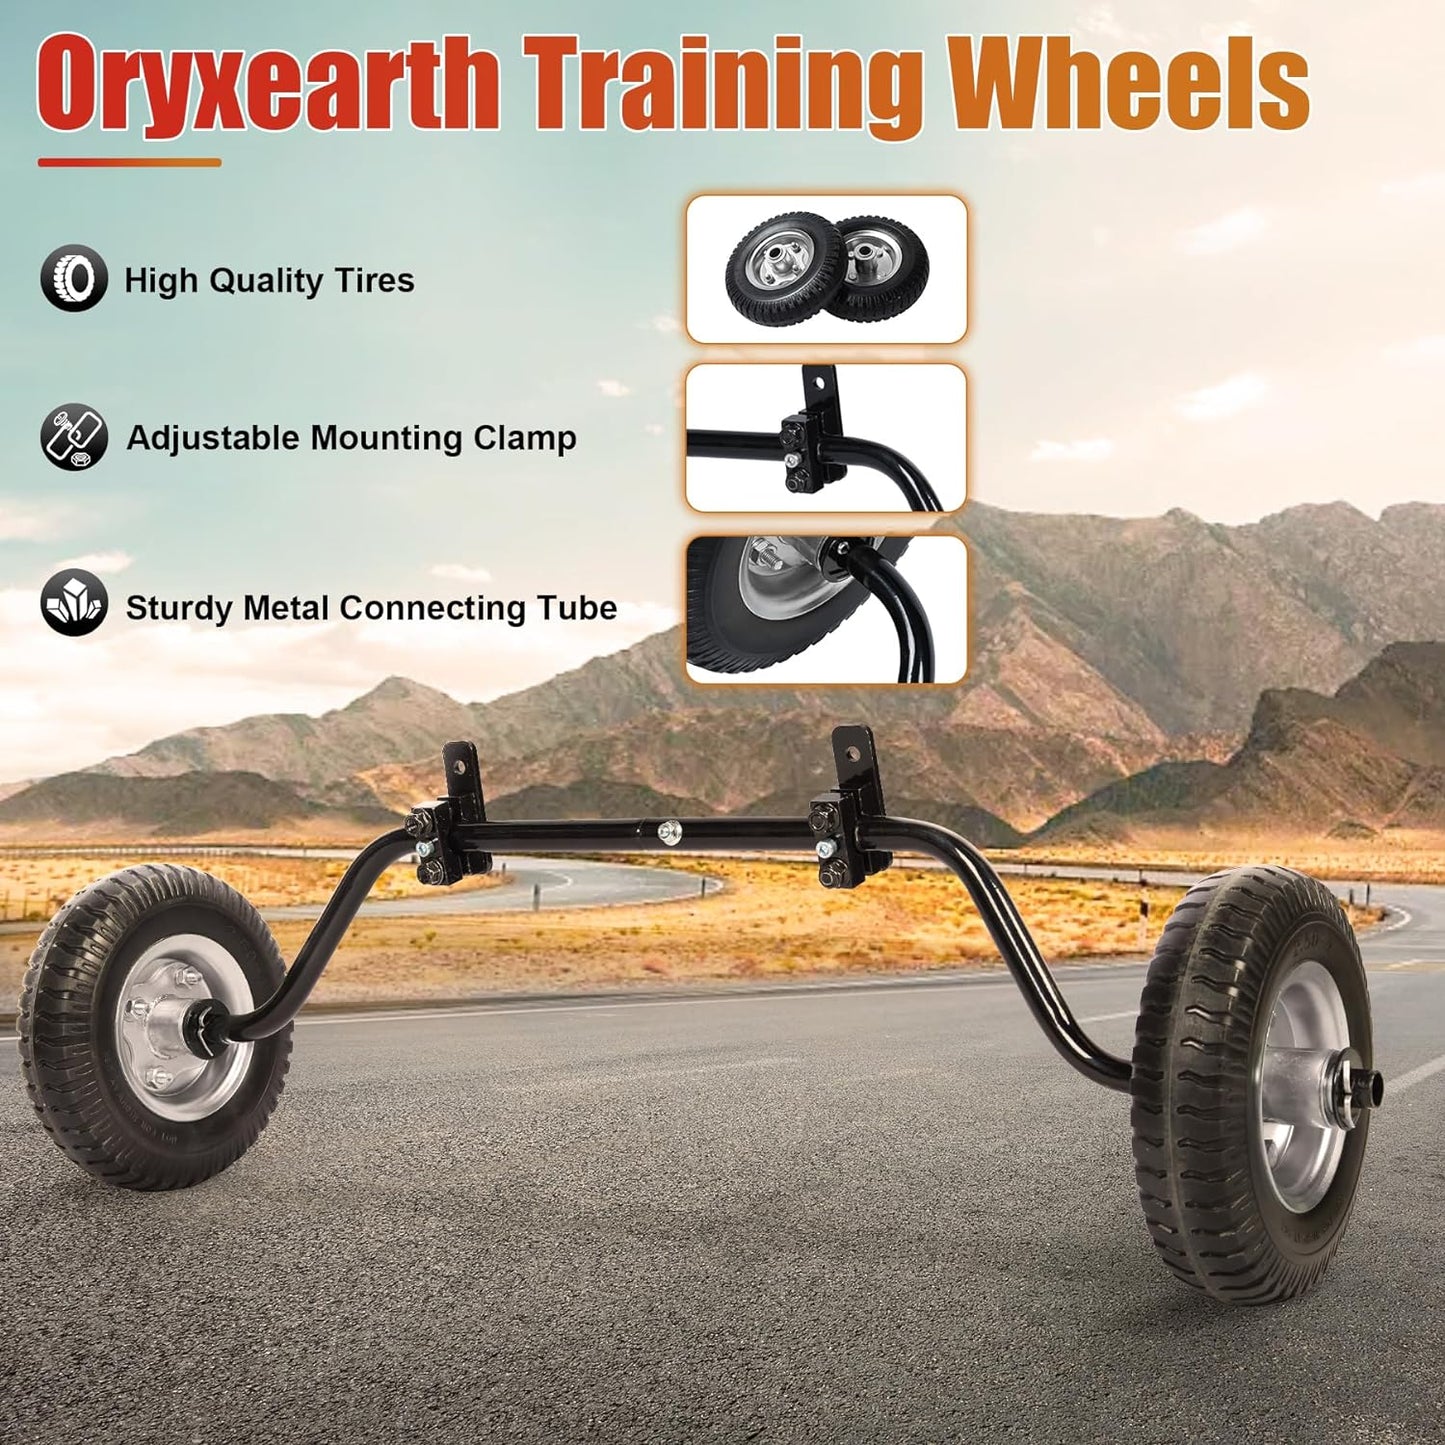 Oryxearth Universal Dirt Bike Training Wheels Compatible with Coleman Rb100 Realtree Rt100 Motovox Mbx10 Mbx11 Mini Bike,Kids Motorcycle Parts for Most Gas Mini Pit Bikes Electric Trail Bike